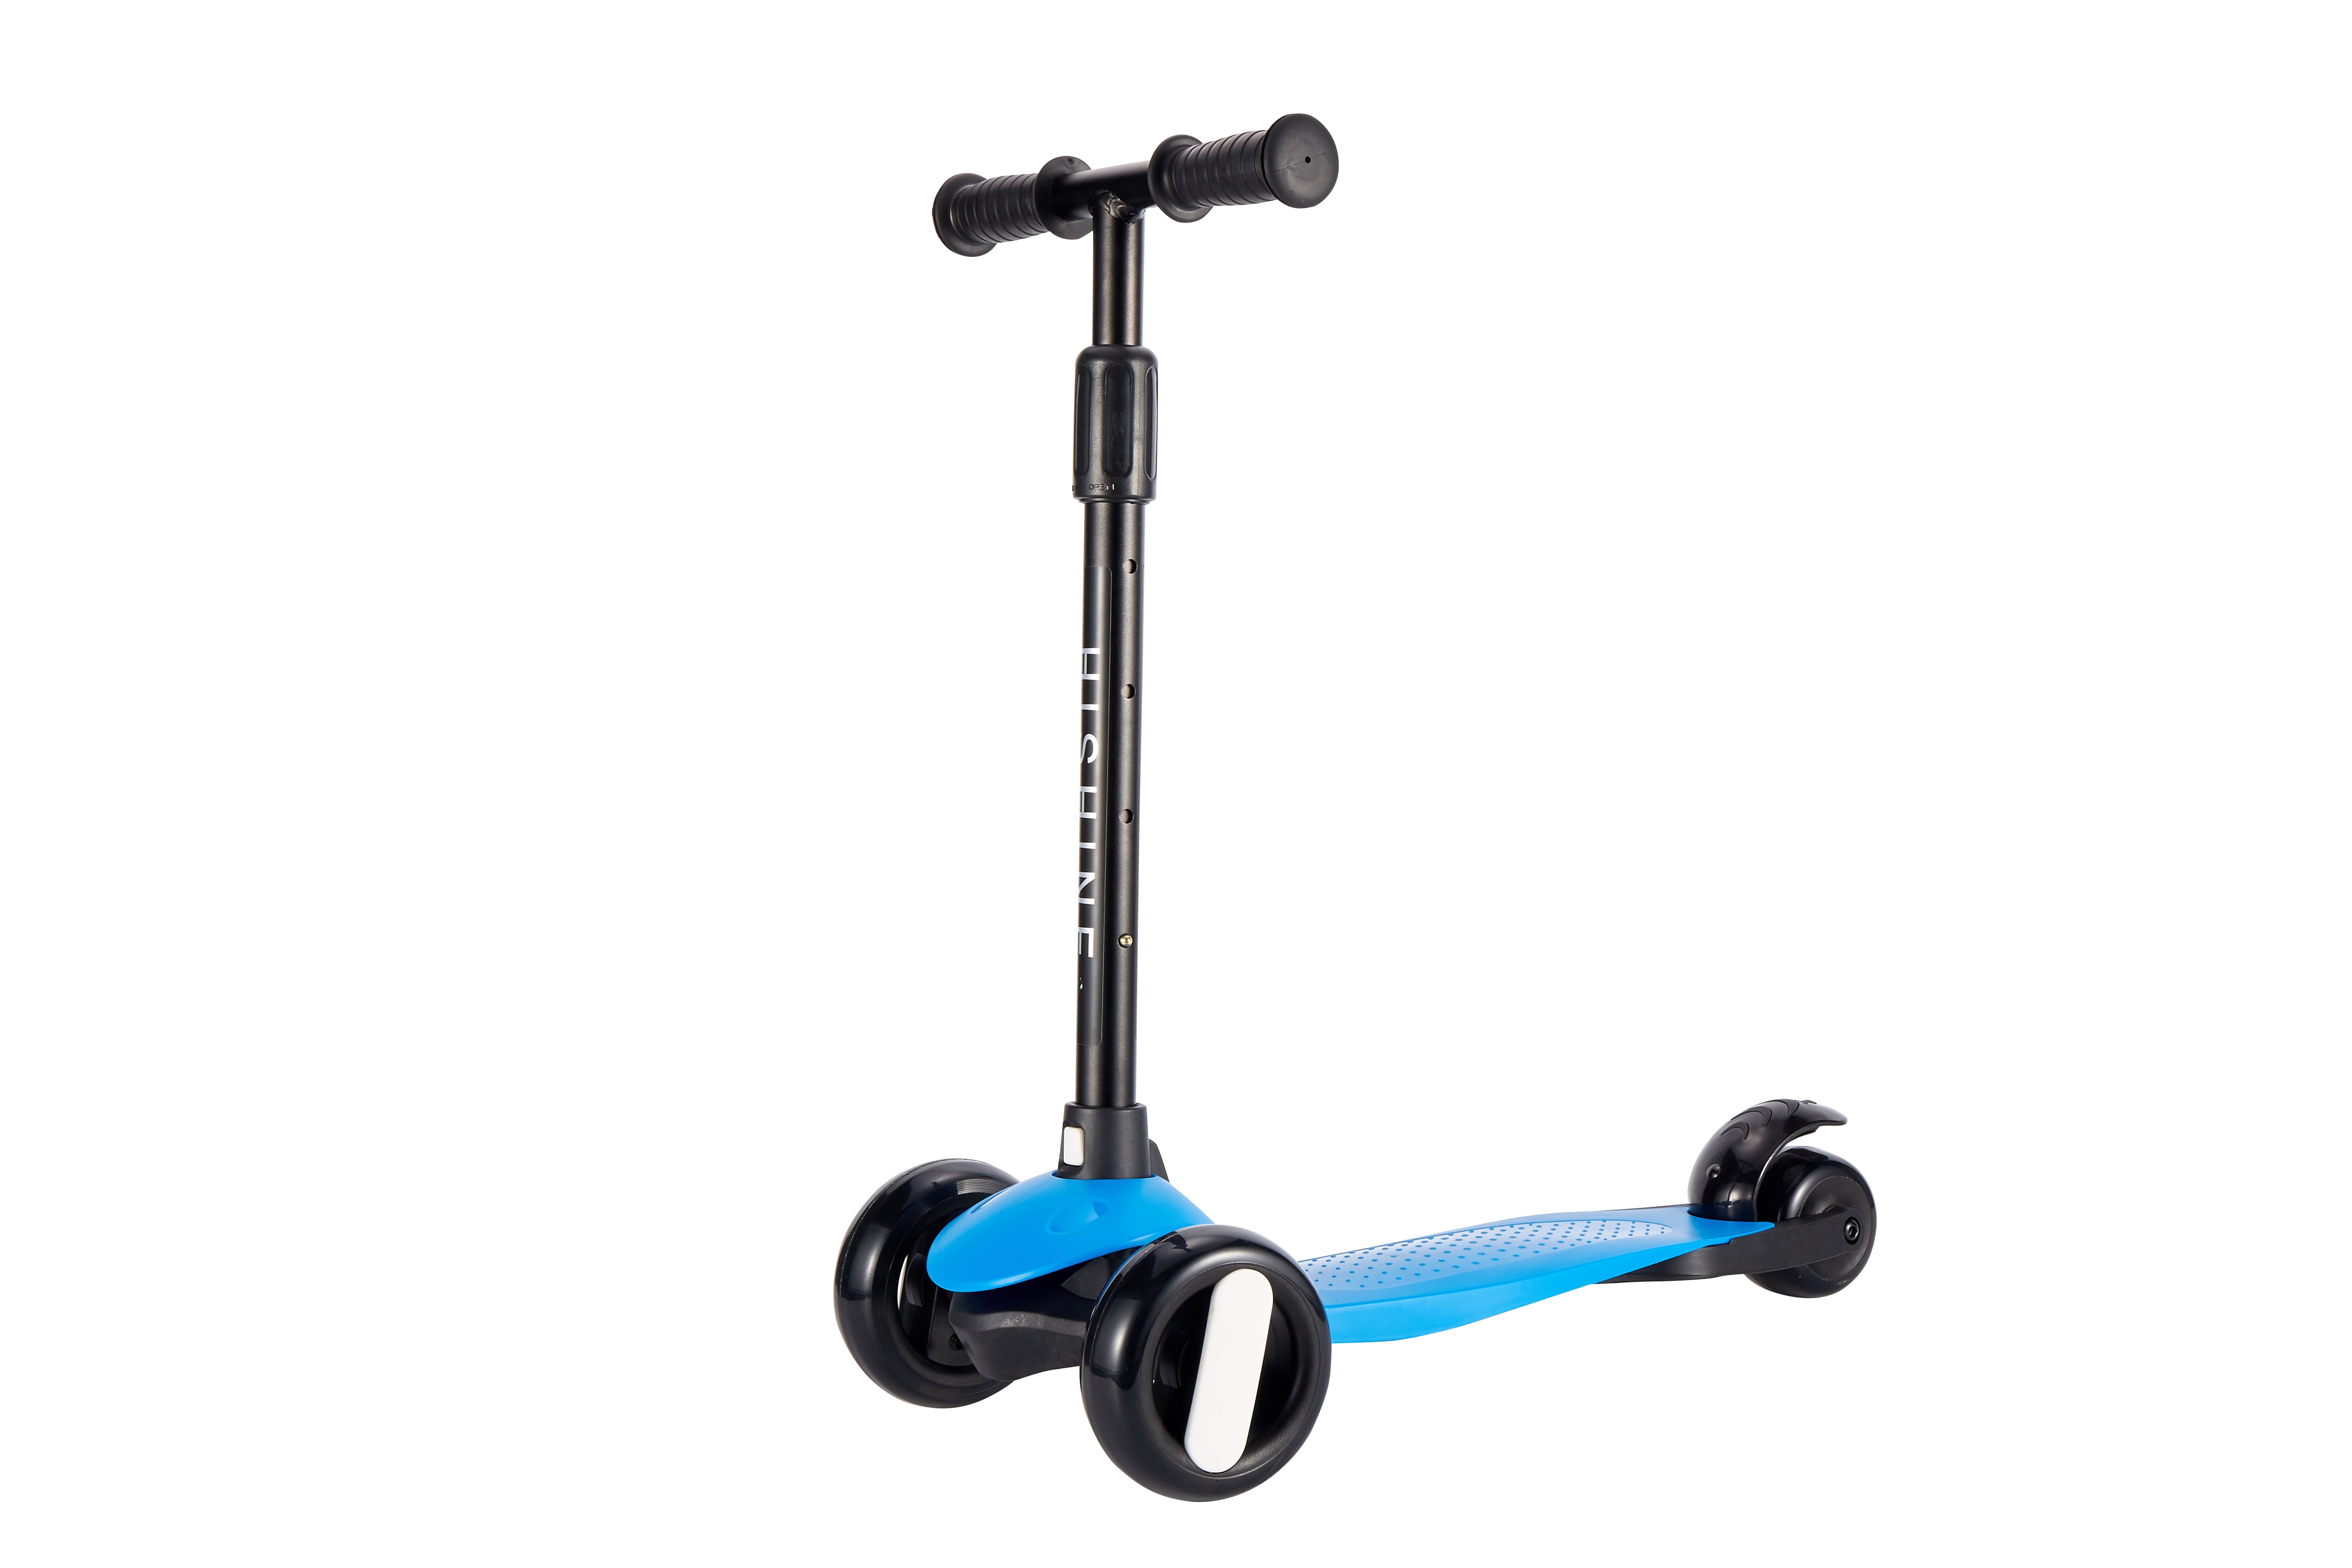 PRINIC 3 wheel kick scooter for kids and toddler 3-5 year old age, boys & girls, adjustable height, lean to steer, flashing wheels, deck, Blue - Walmart.com